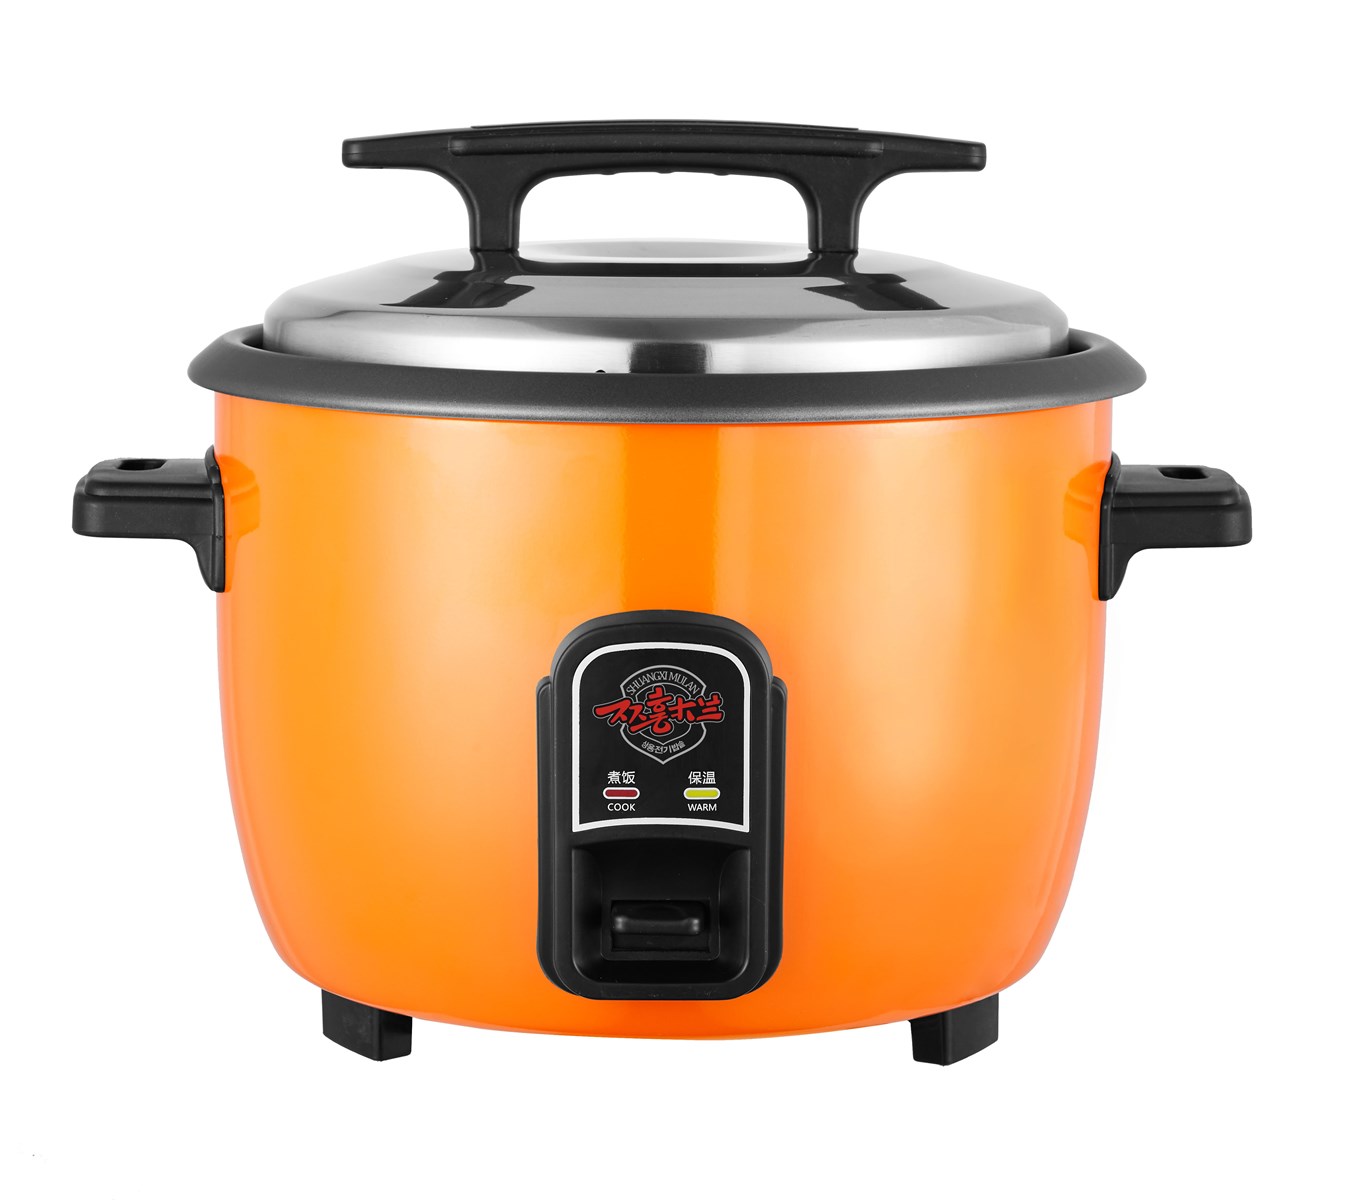 BIG POT CLASSIC SERIES OF COMMERCIAL ELECTRIC RICE COOKER